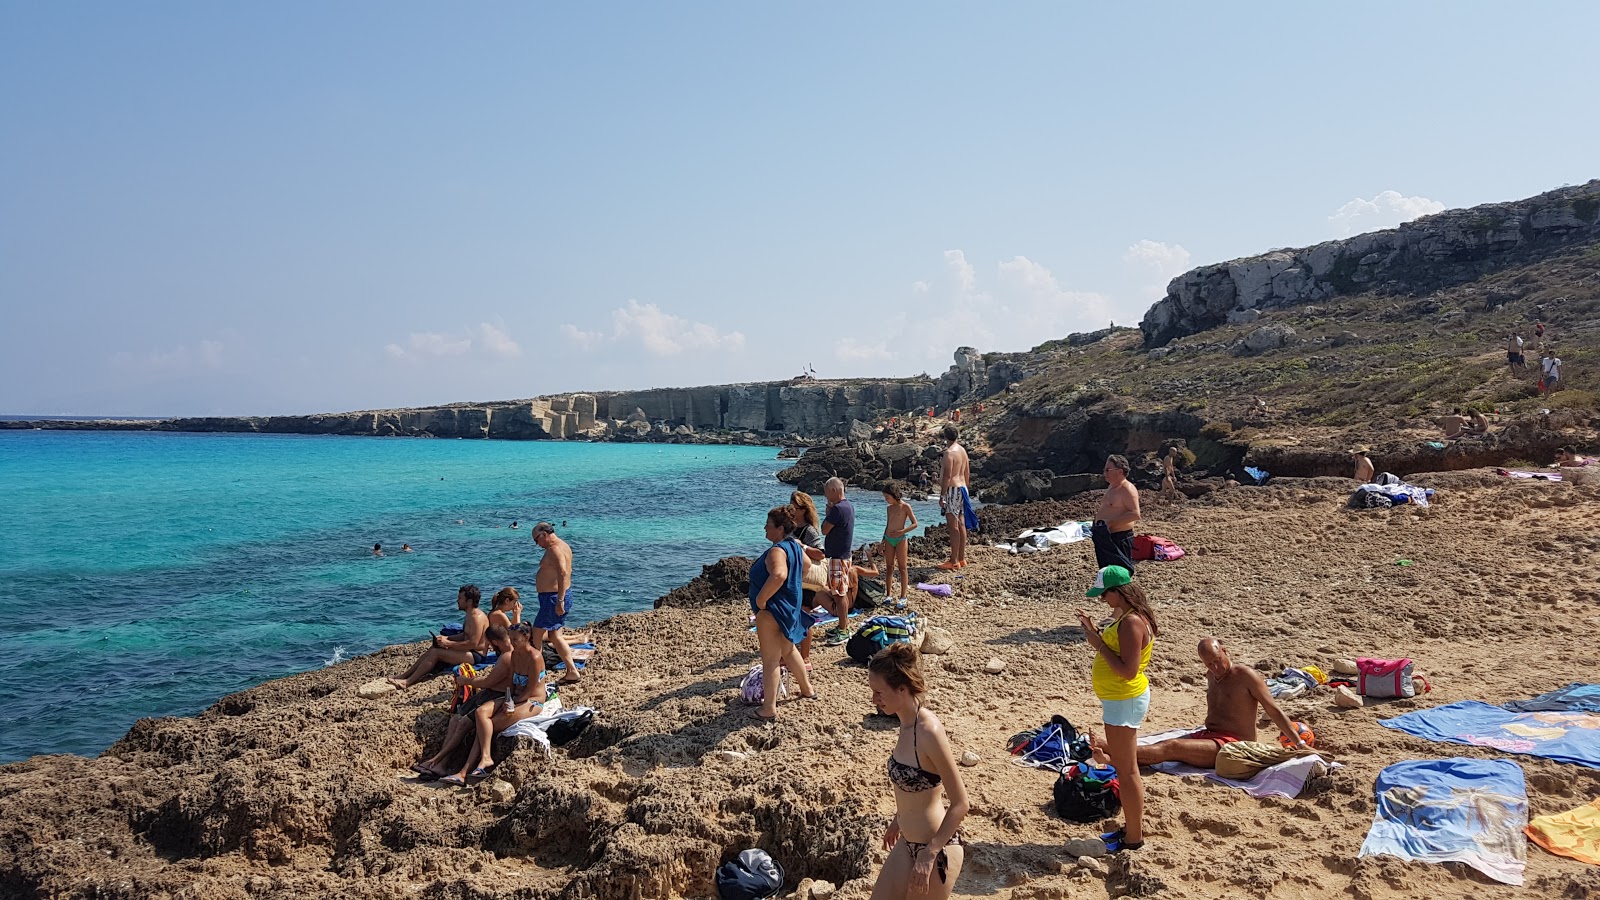 Photo of Spiaggia Di Cala Rossa with partly clean level of cleanliness